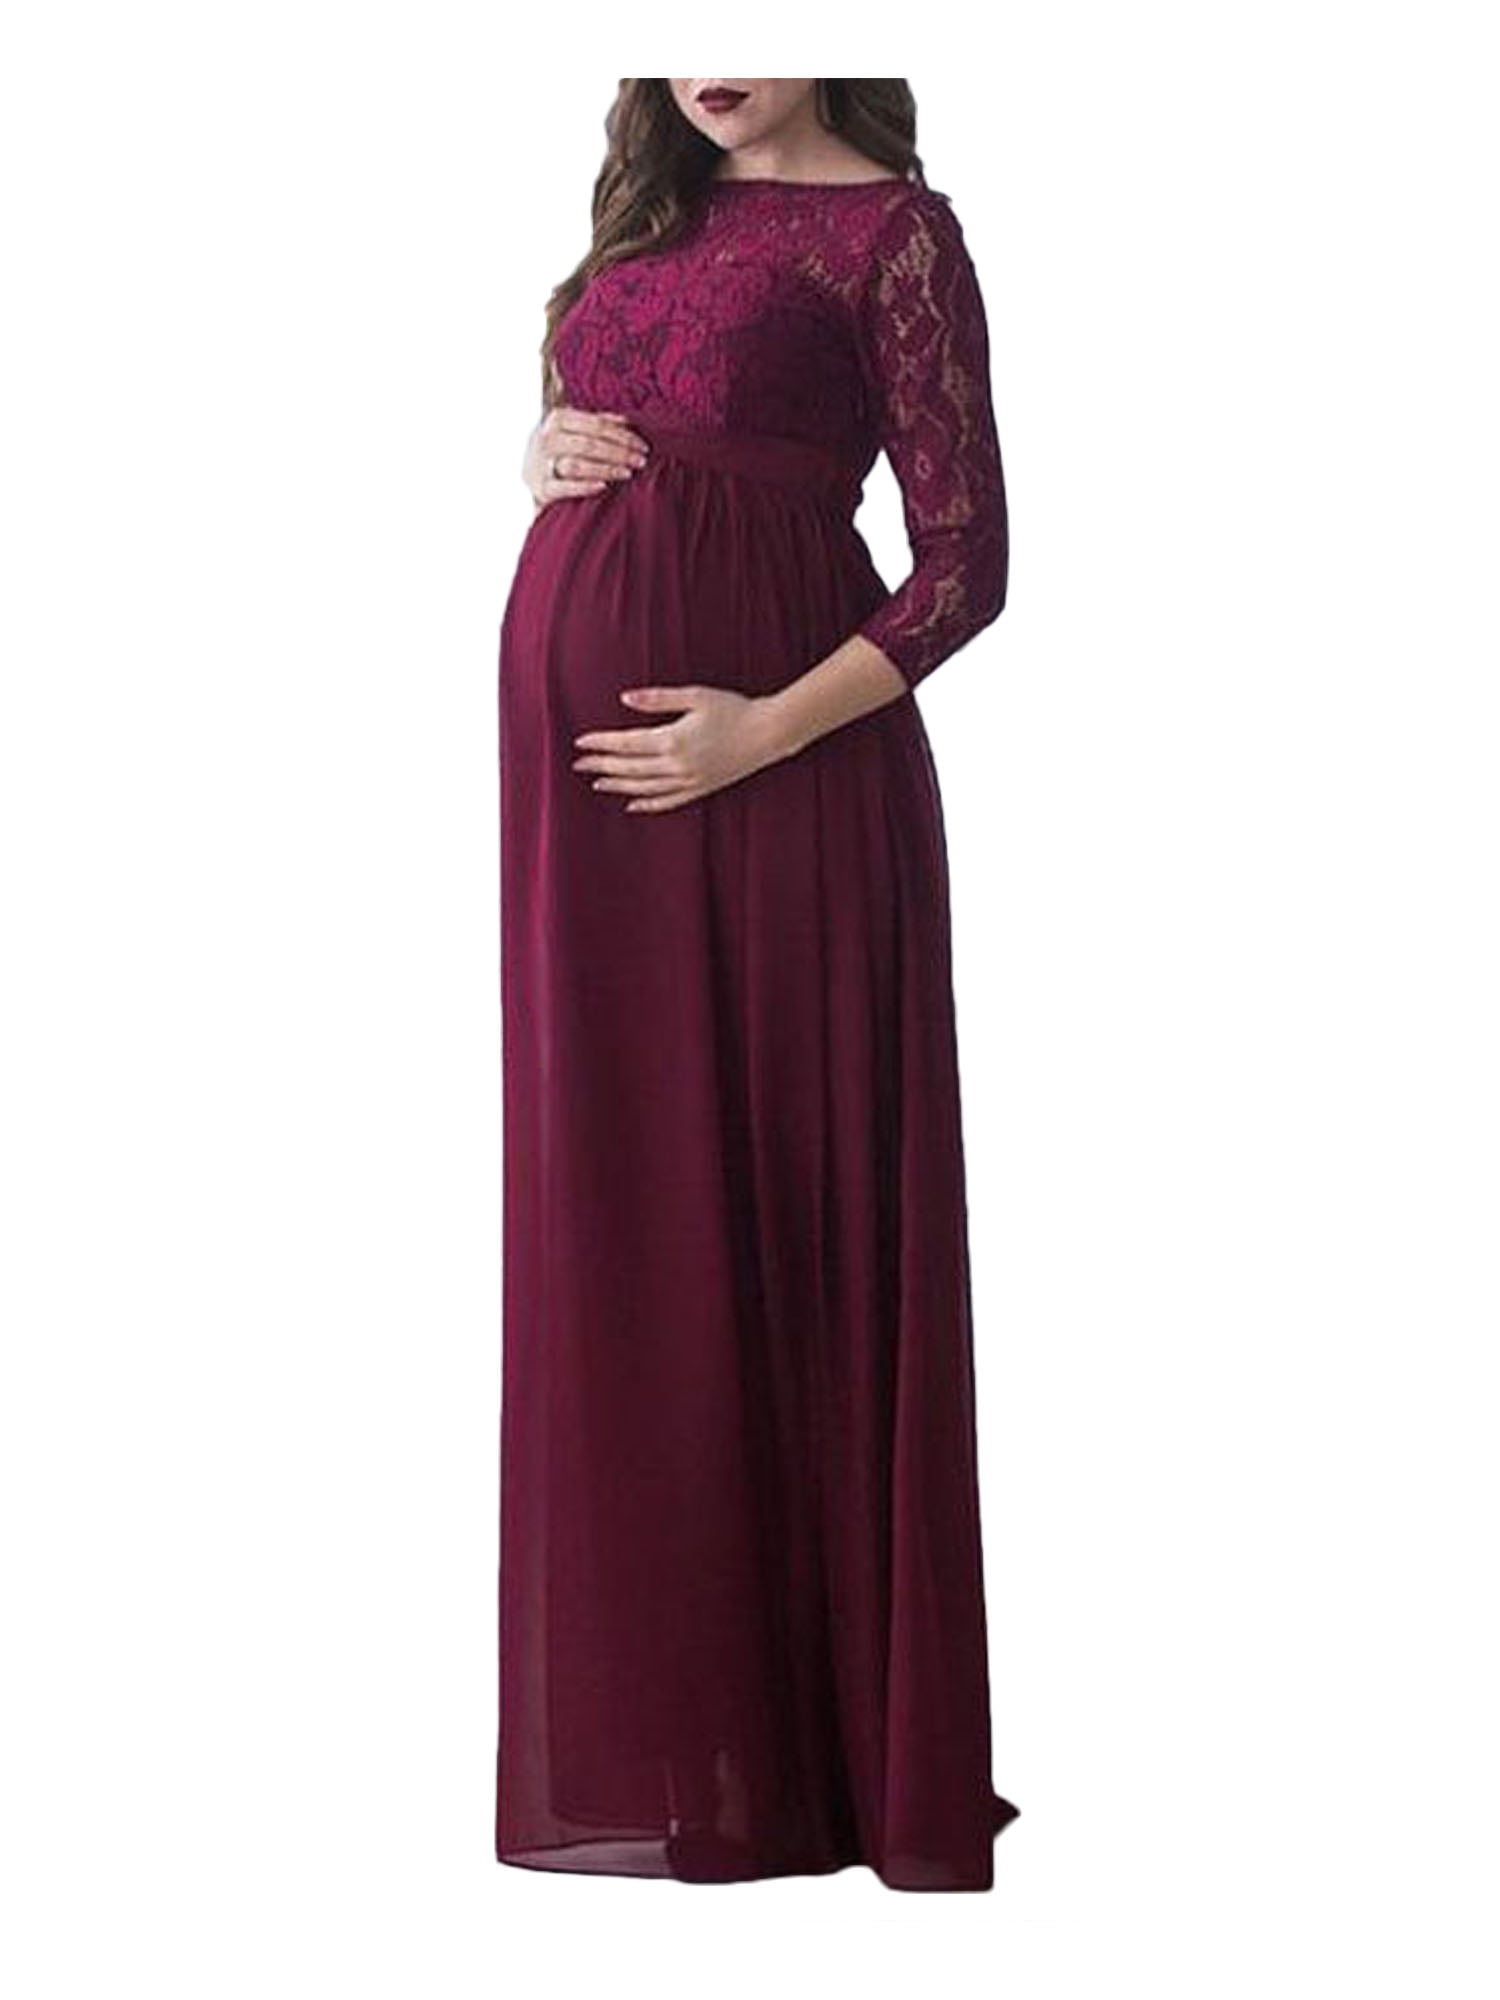 Pregnancy Maternity Lace Maxi Dress Lady Fishtail Evening Party Gown ...